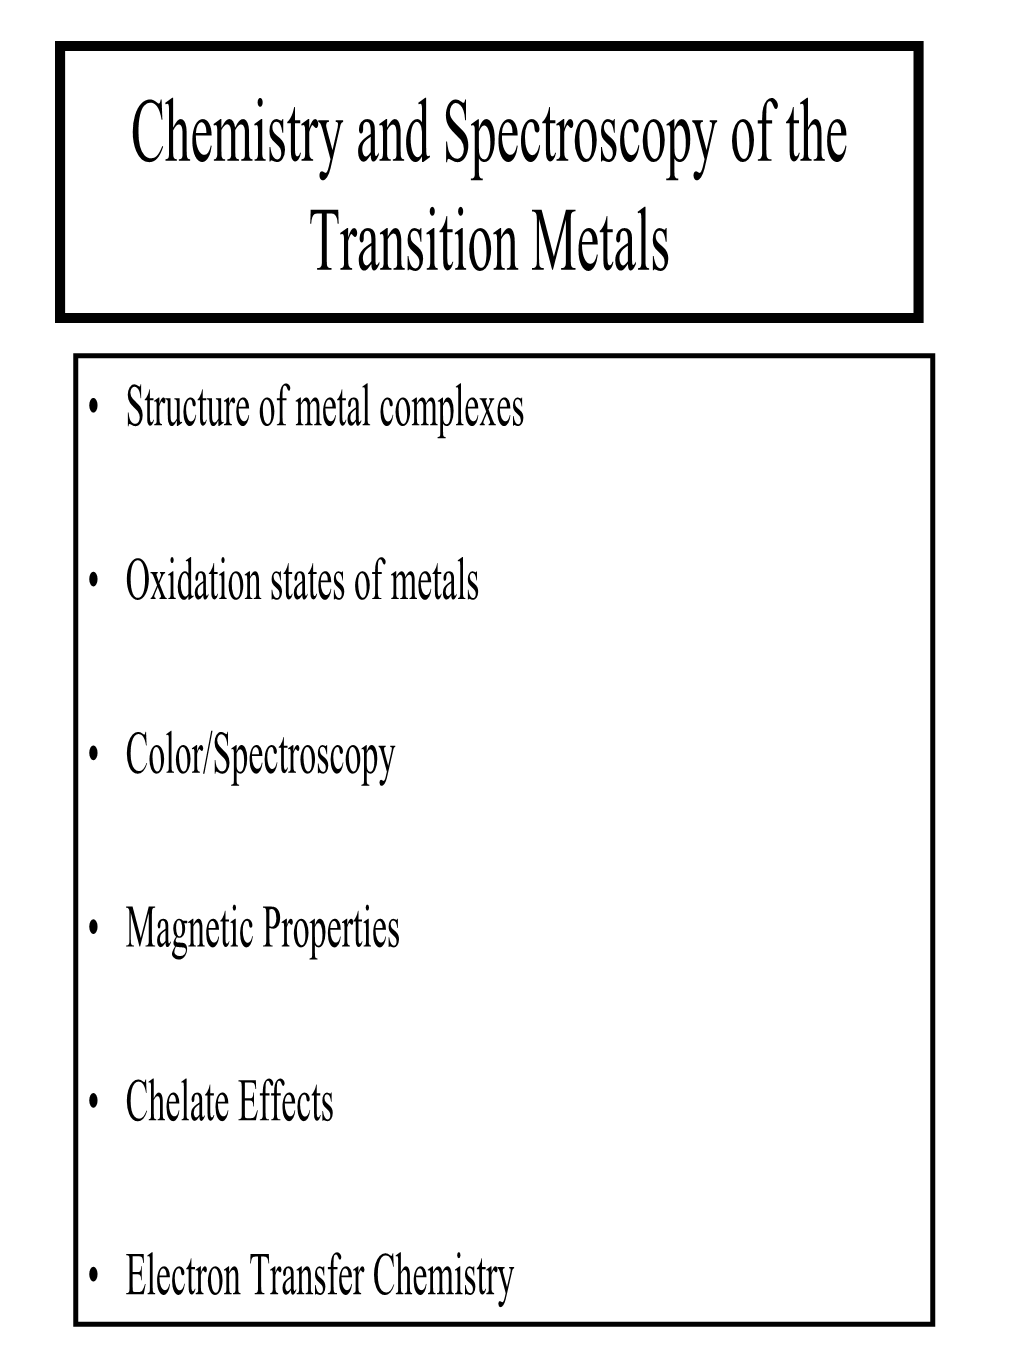 Chemistry and Spectroscopy of the Transition Metals